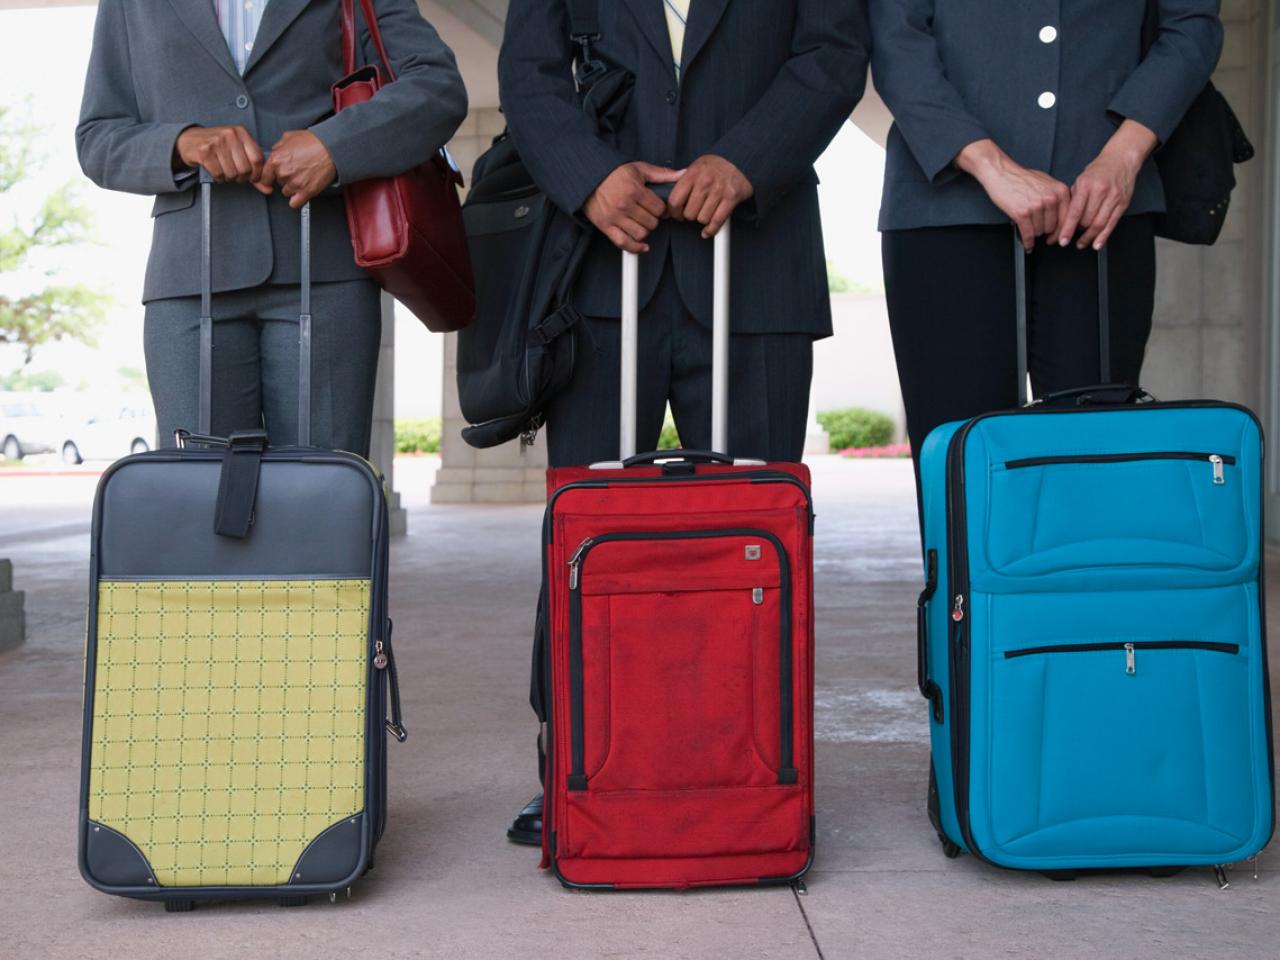 Carry-on vs checked bags: Which should you fly with? - The Washington Post